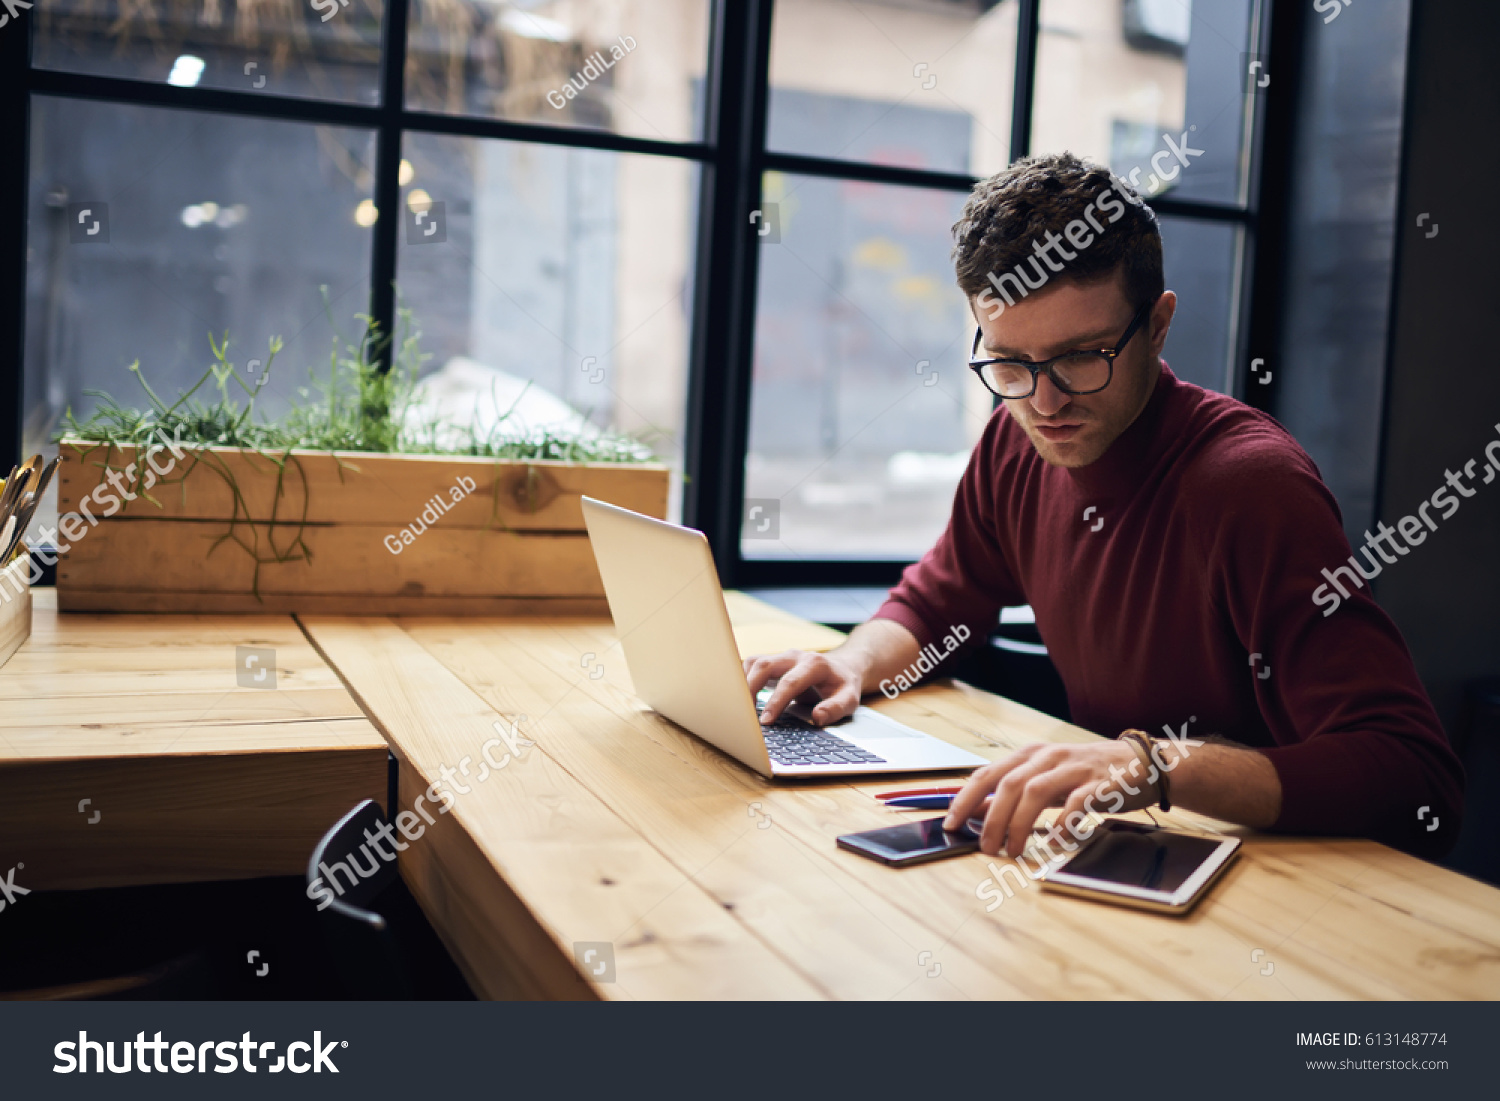 Confident busy male freelancer in trendy eyewear doing remote job using modern technologies checking installation of application on smartphone while surfing net searching information for presentation #613148774